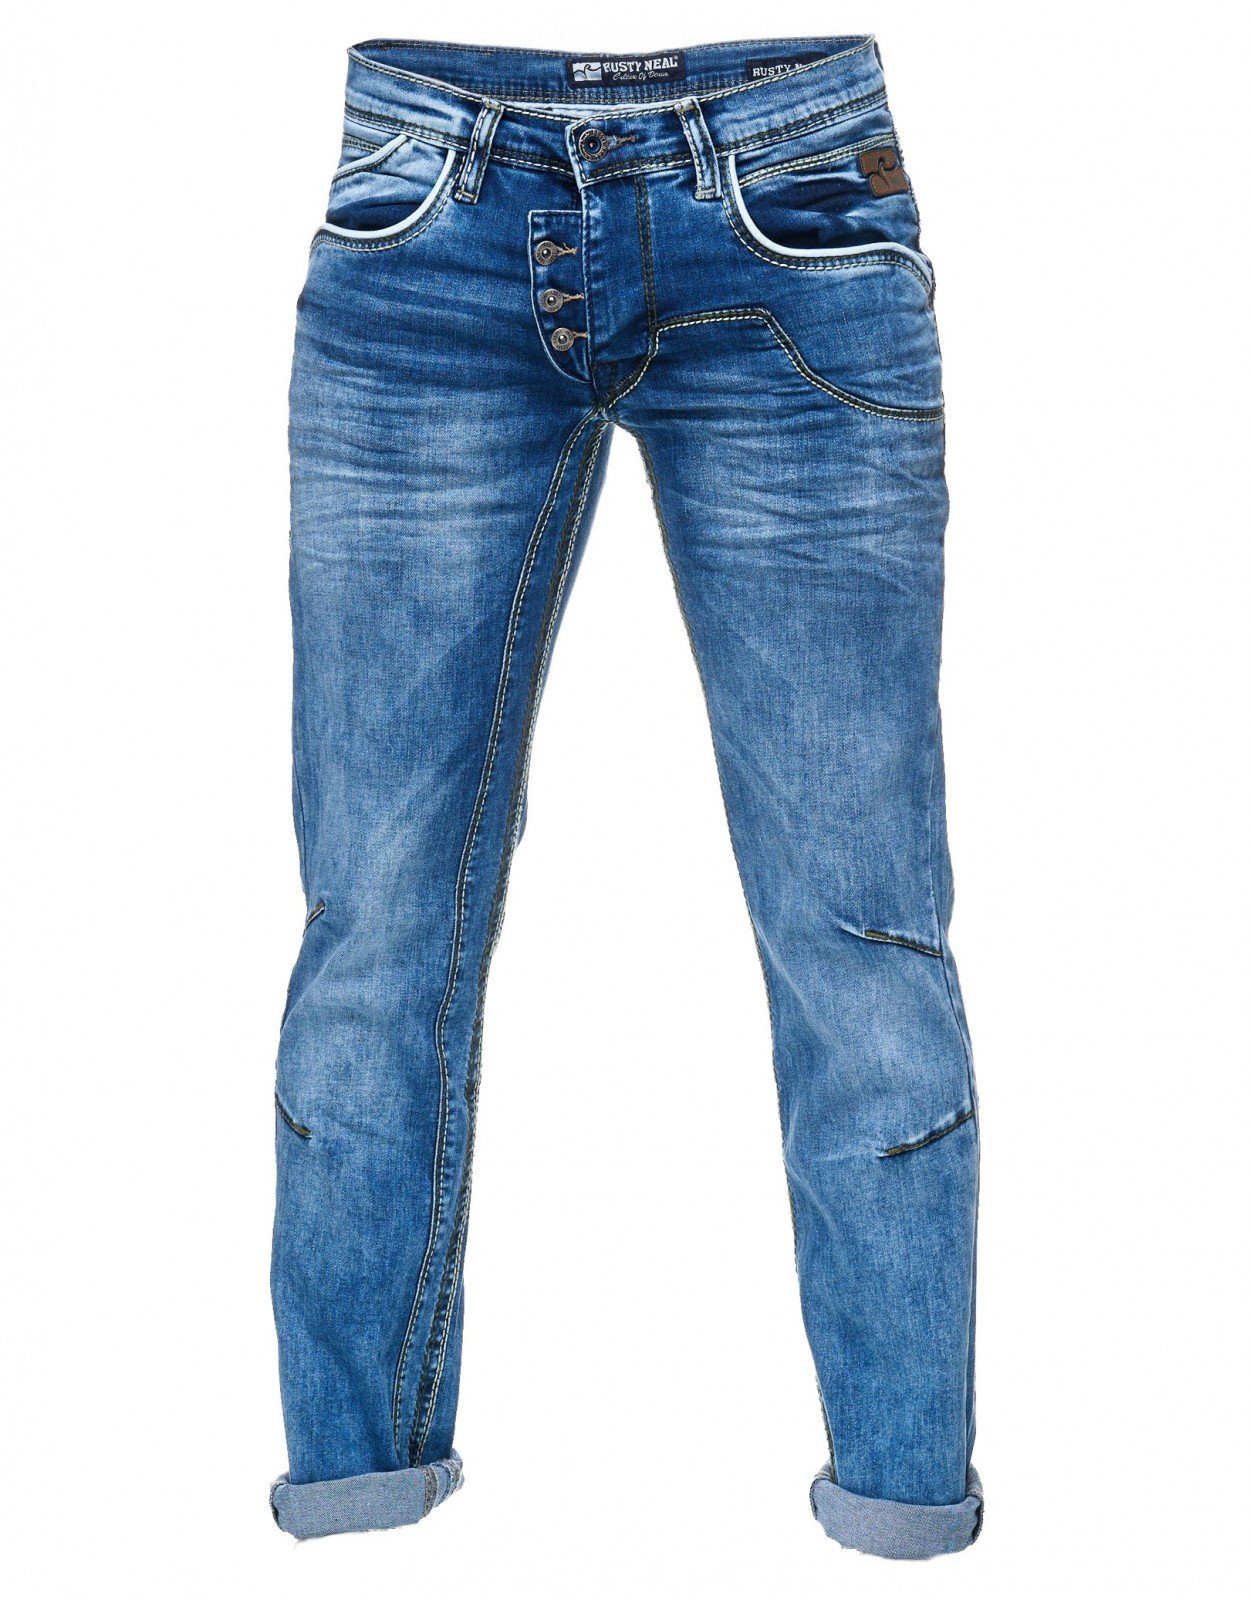 Neal Design Rusty in Straight-Jeans coolem